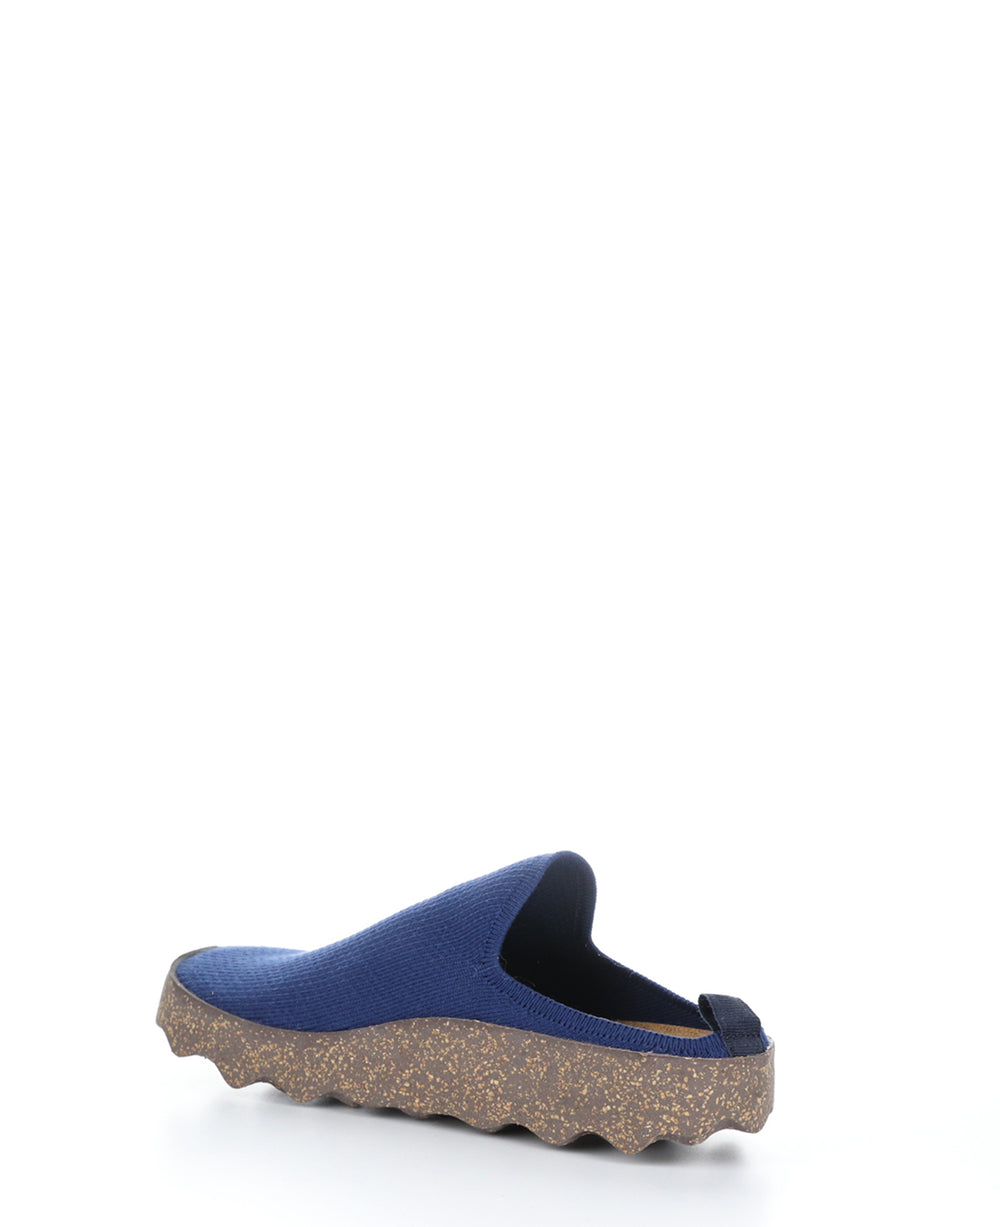 CLOG102ASP NAVY/BROWN Slip-on Shoes|CLOG102ASP Chaussures à Bout Rond in Bleu